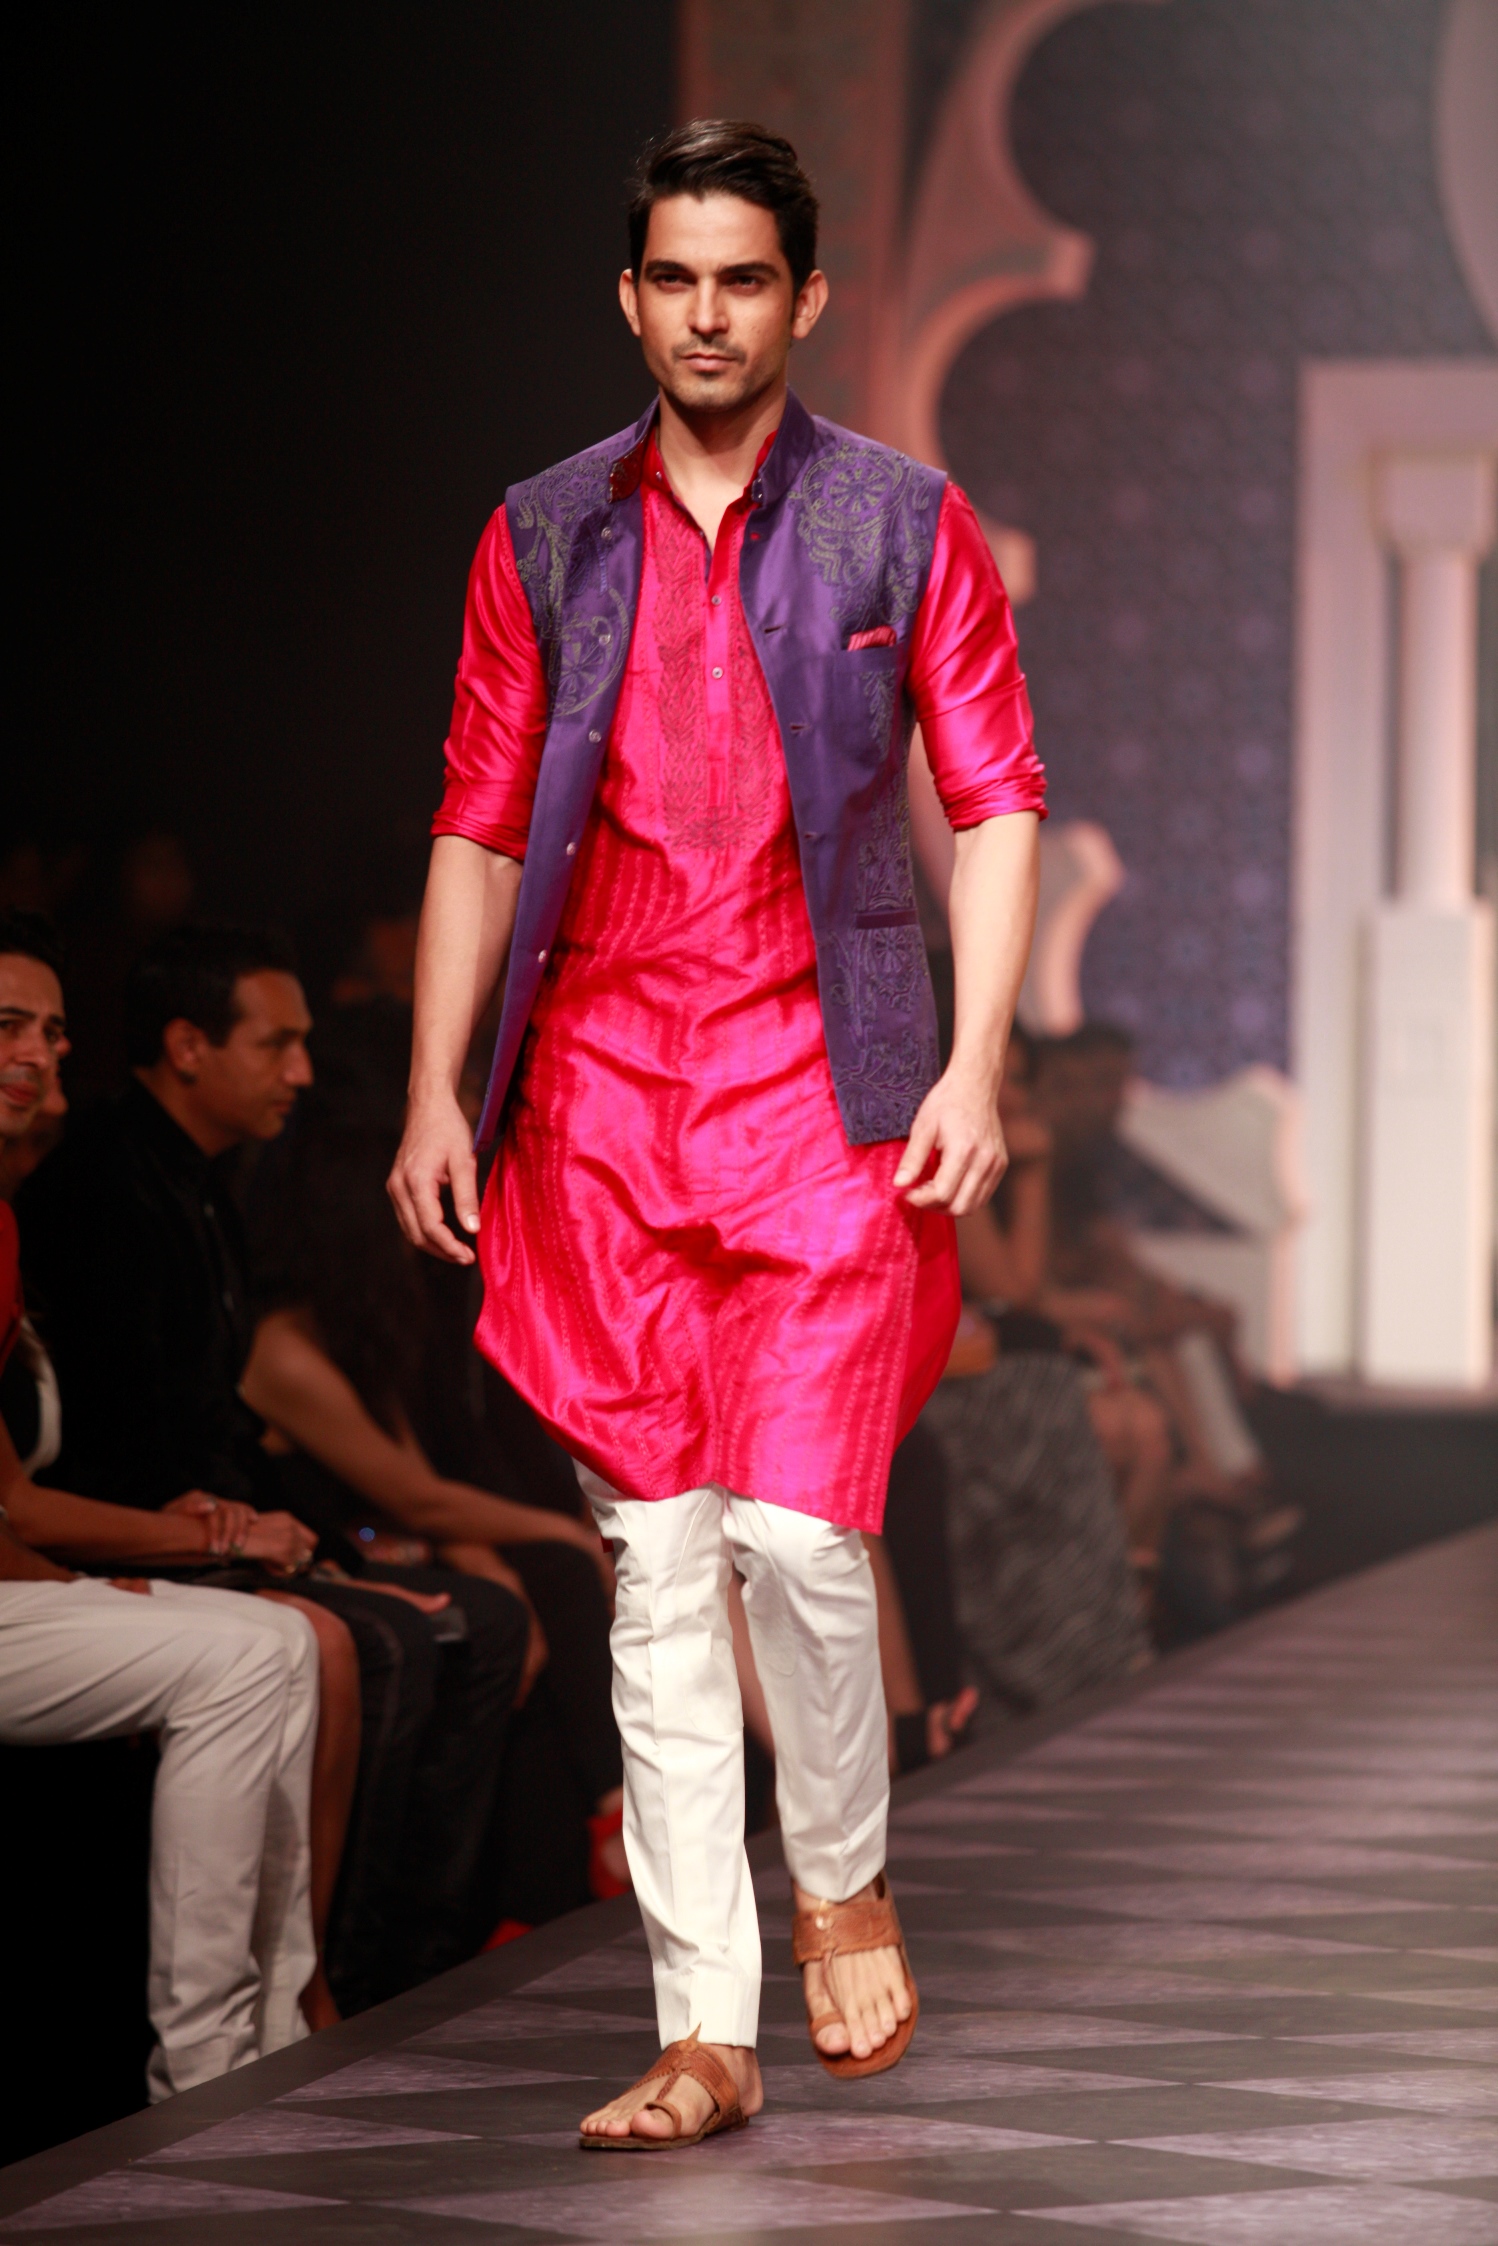 Seen at Aamby Valley India Bridal Fashion Week - Day 3- Model in a Raghavendra Rathore creation